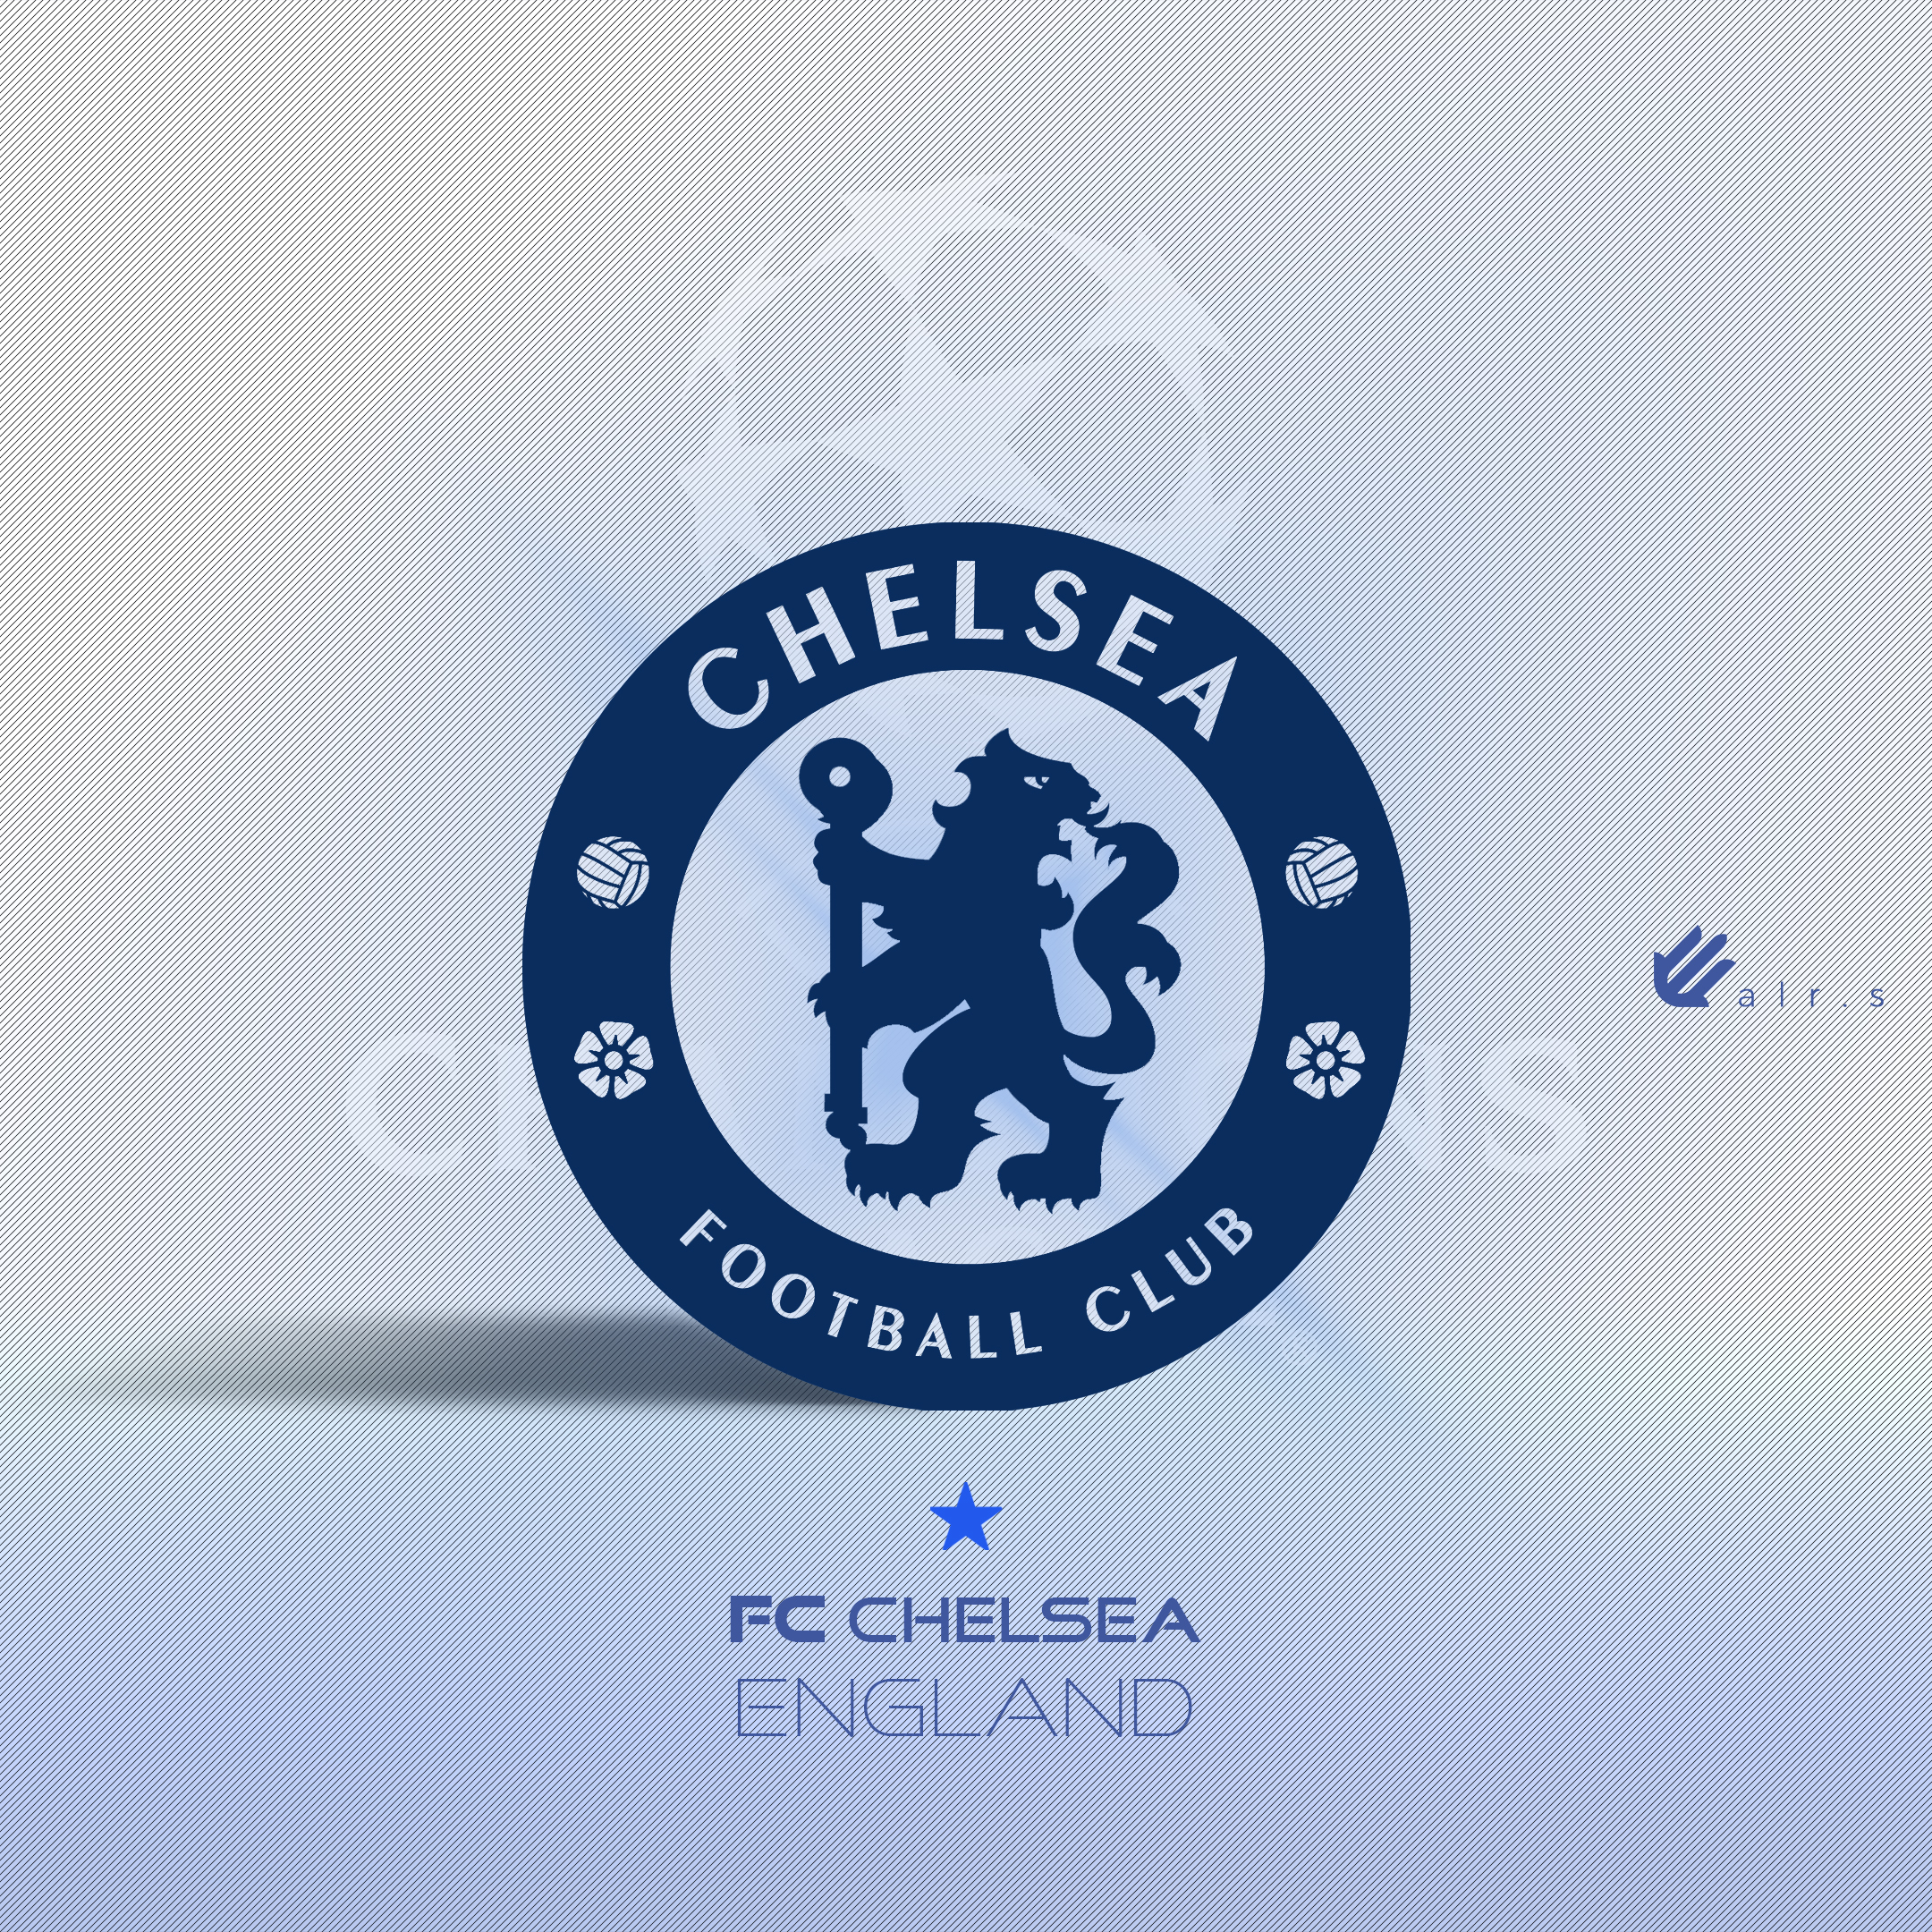 General 2160x2160 Football  logo Champions League clubs graphic design creativity photography colorful soccer sport Premier League soccer clubs Chelsea FC